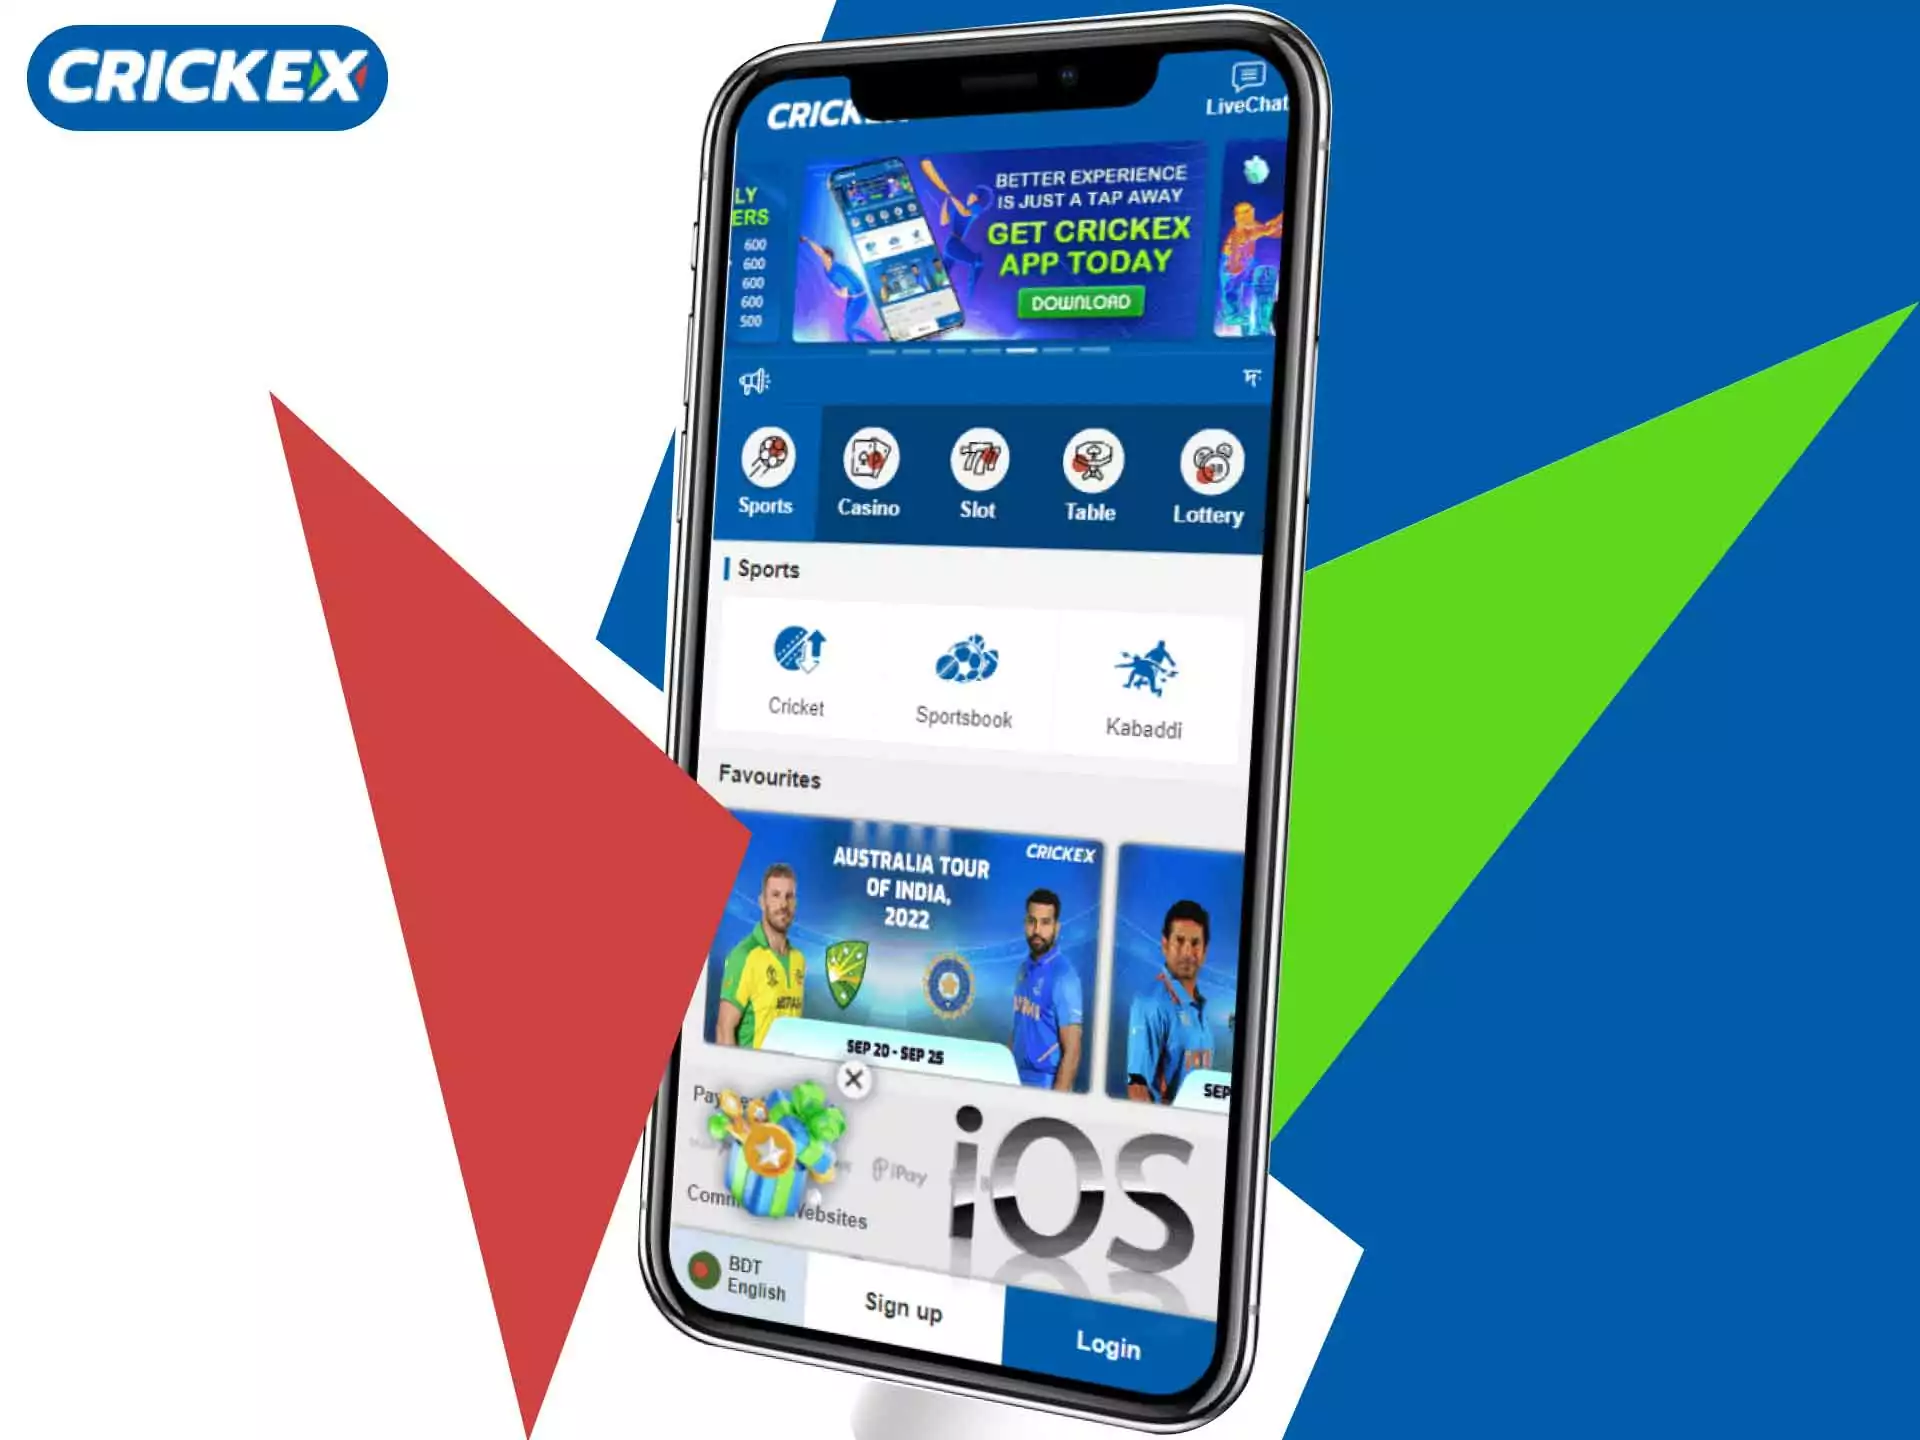 You can download the Crickex app on your iPhone or iPad.